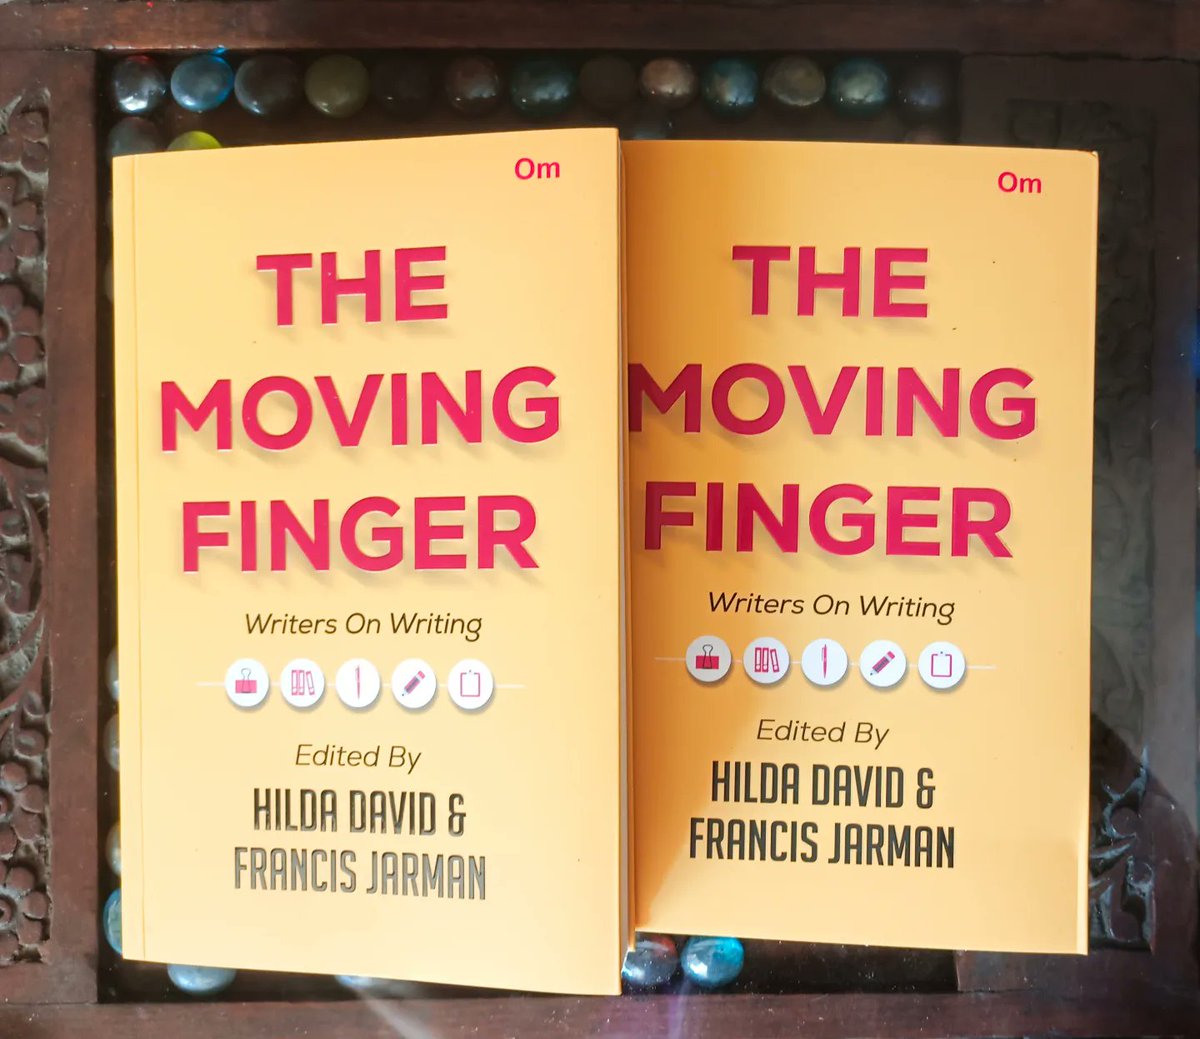 Delighted to have contributed an essay on writing mystery fiction, in this remarkable anthology on 'writers on writing', titled 'The Moving Finger', edited by Hilda David & Francis Jarman. A treasure trove for #writers & others. @ombooksdelhi #WritingCommmunity